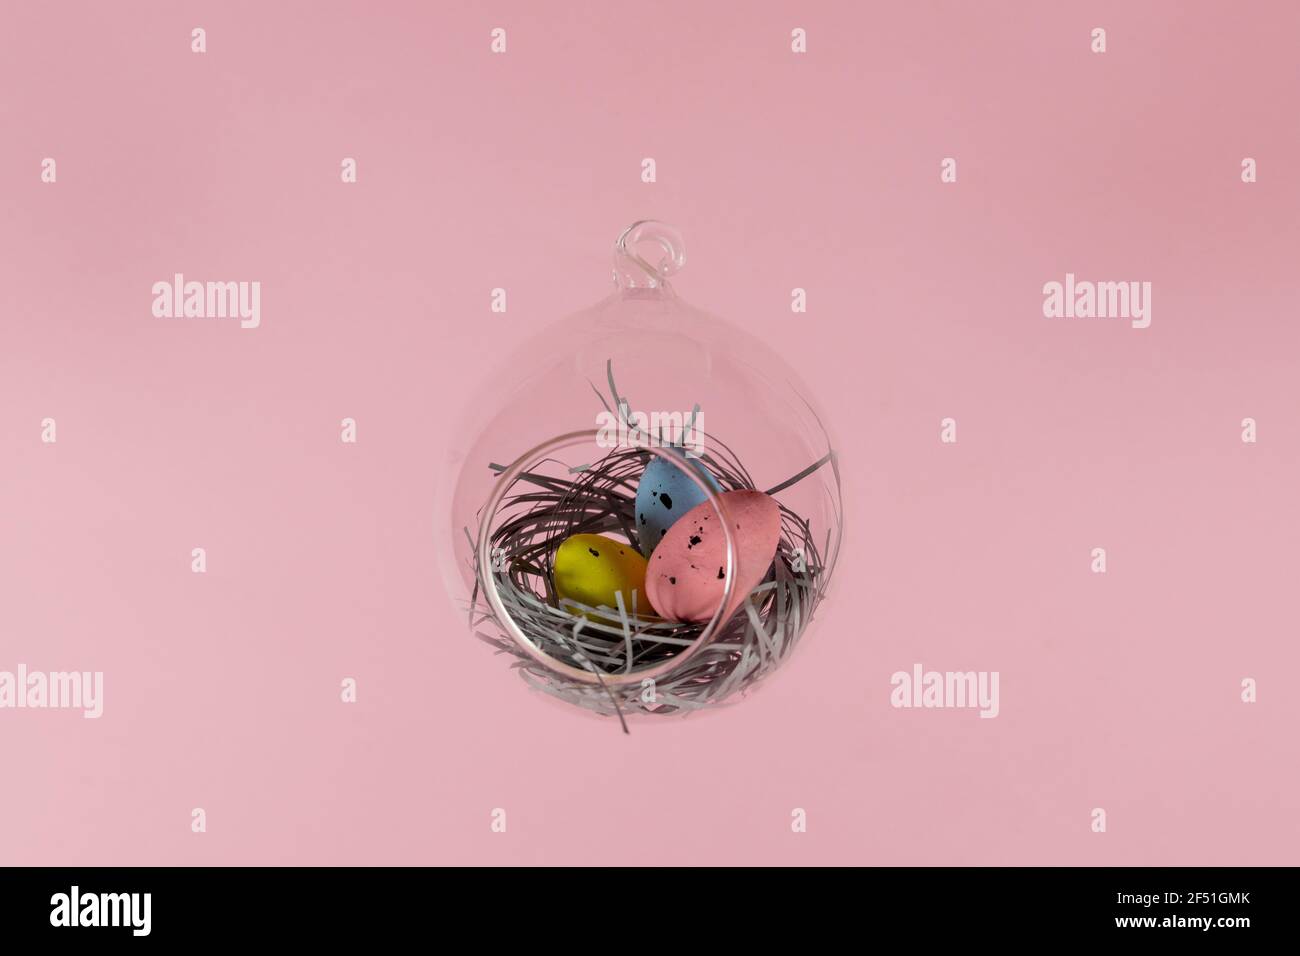 Three eggs in a floating glass nest. Pink background. Creative Easter concept Stock Photo